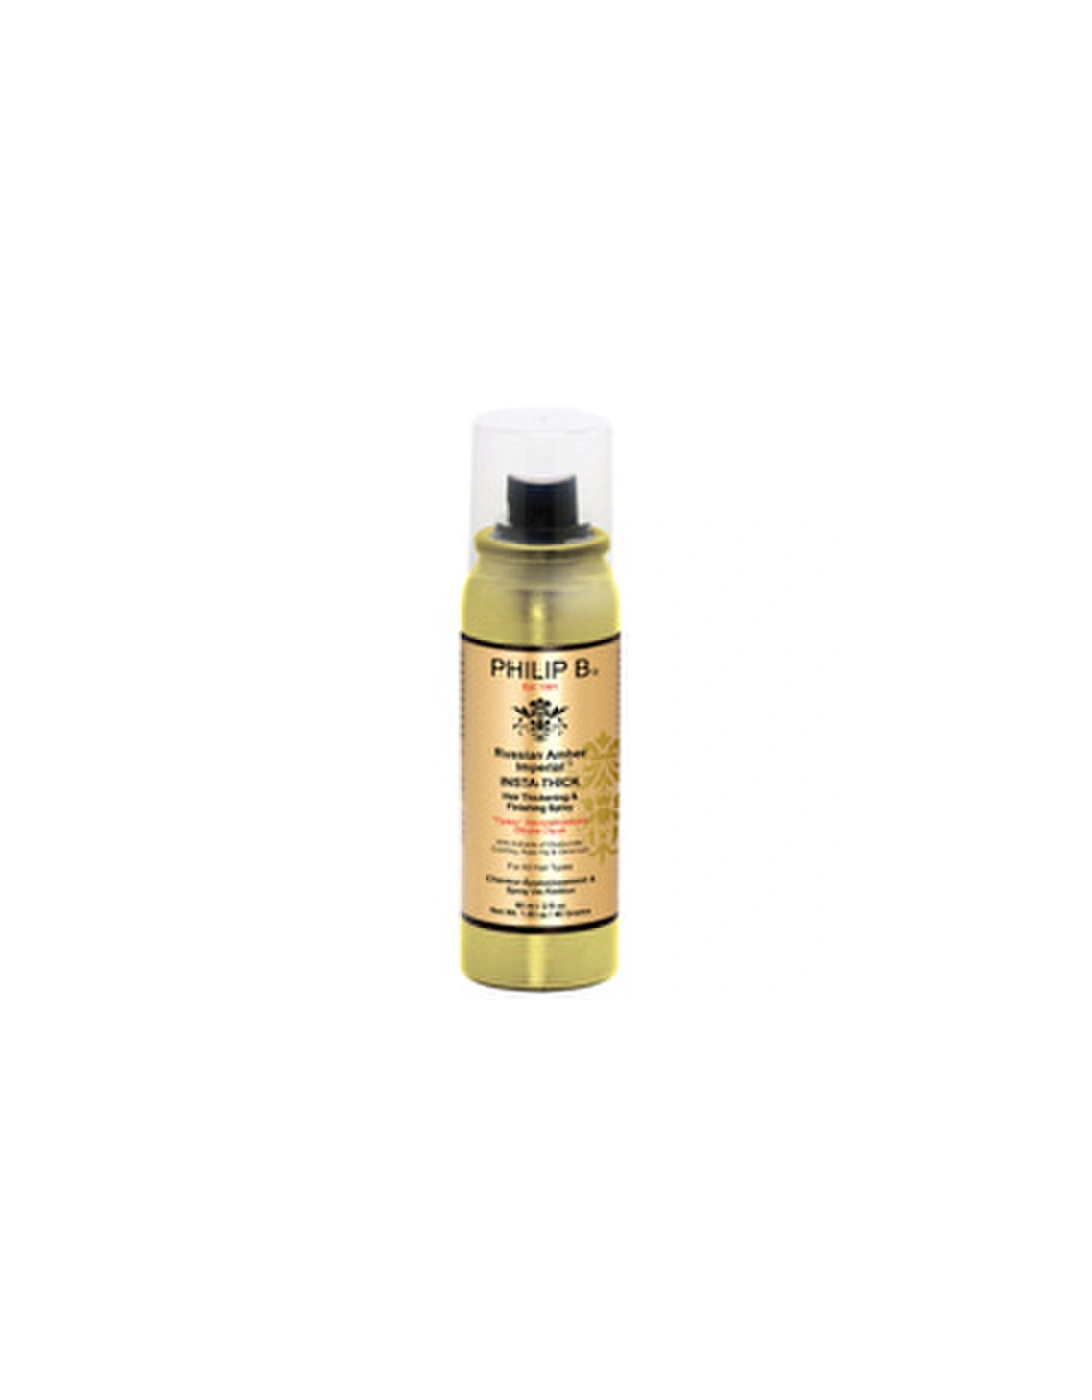 Russian Amber Imperial Insta-Thick Hair Spray - Philip B, 2 of 1